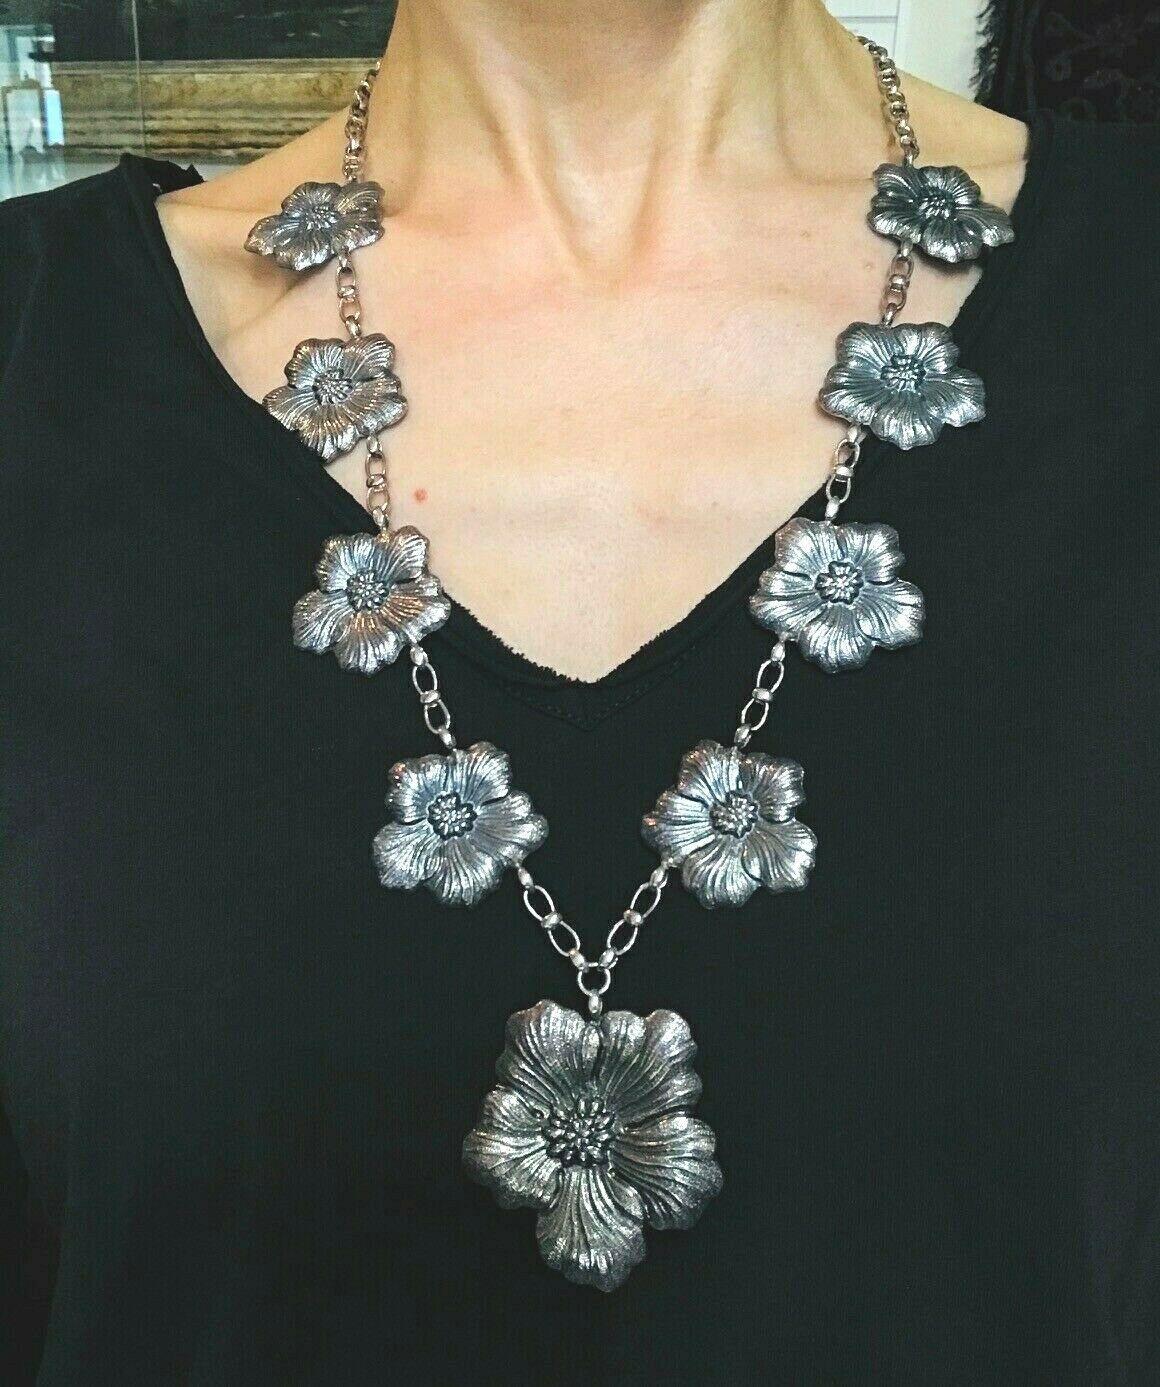 Gorgeous vintage flower necklace from Buccellati. Features hammered sterling silver flowers and oval link chain. Excellent Italian workmanship and an exquisite look. Stamped with the Buccellati maker's mark, a hallmark for sterling silver and a